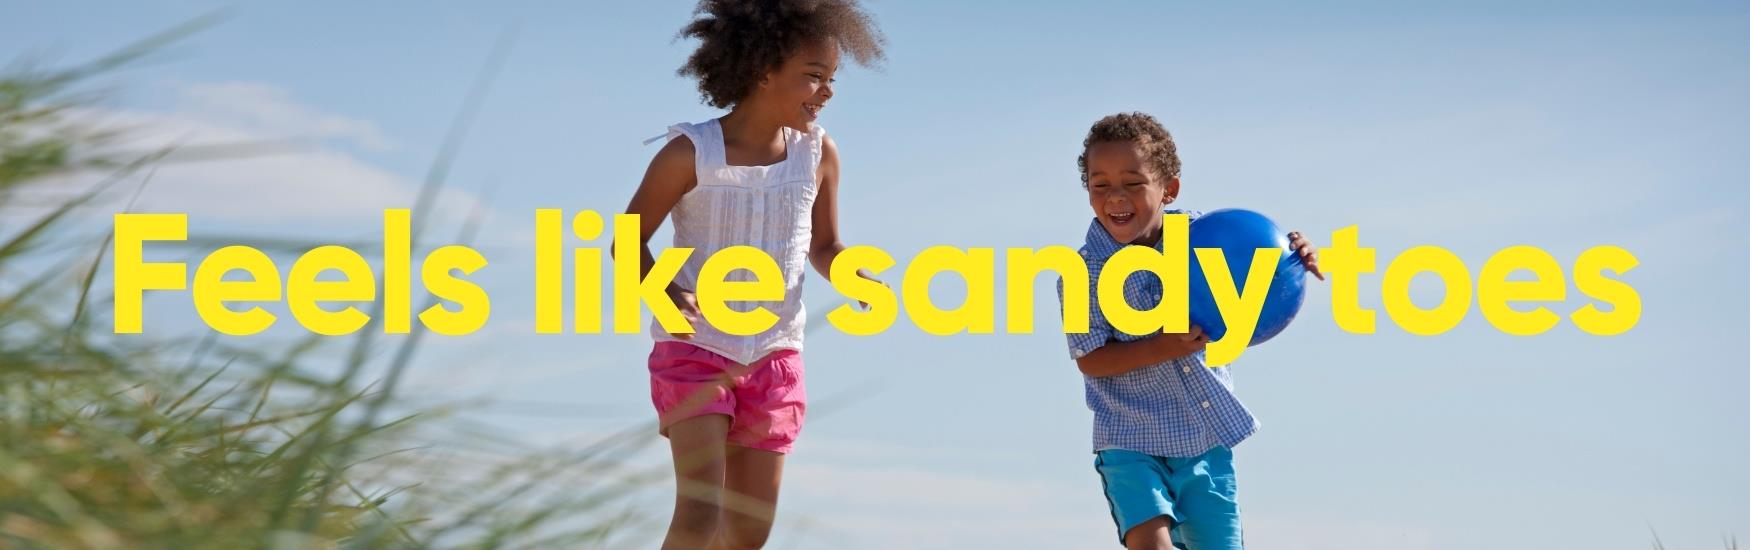 Kids playing on the beach with a ball with text that reads "Feels like sandy toes"